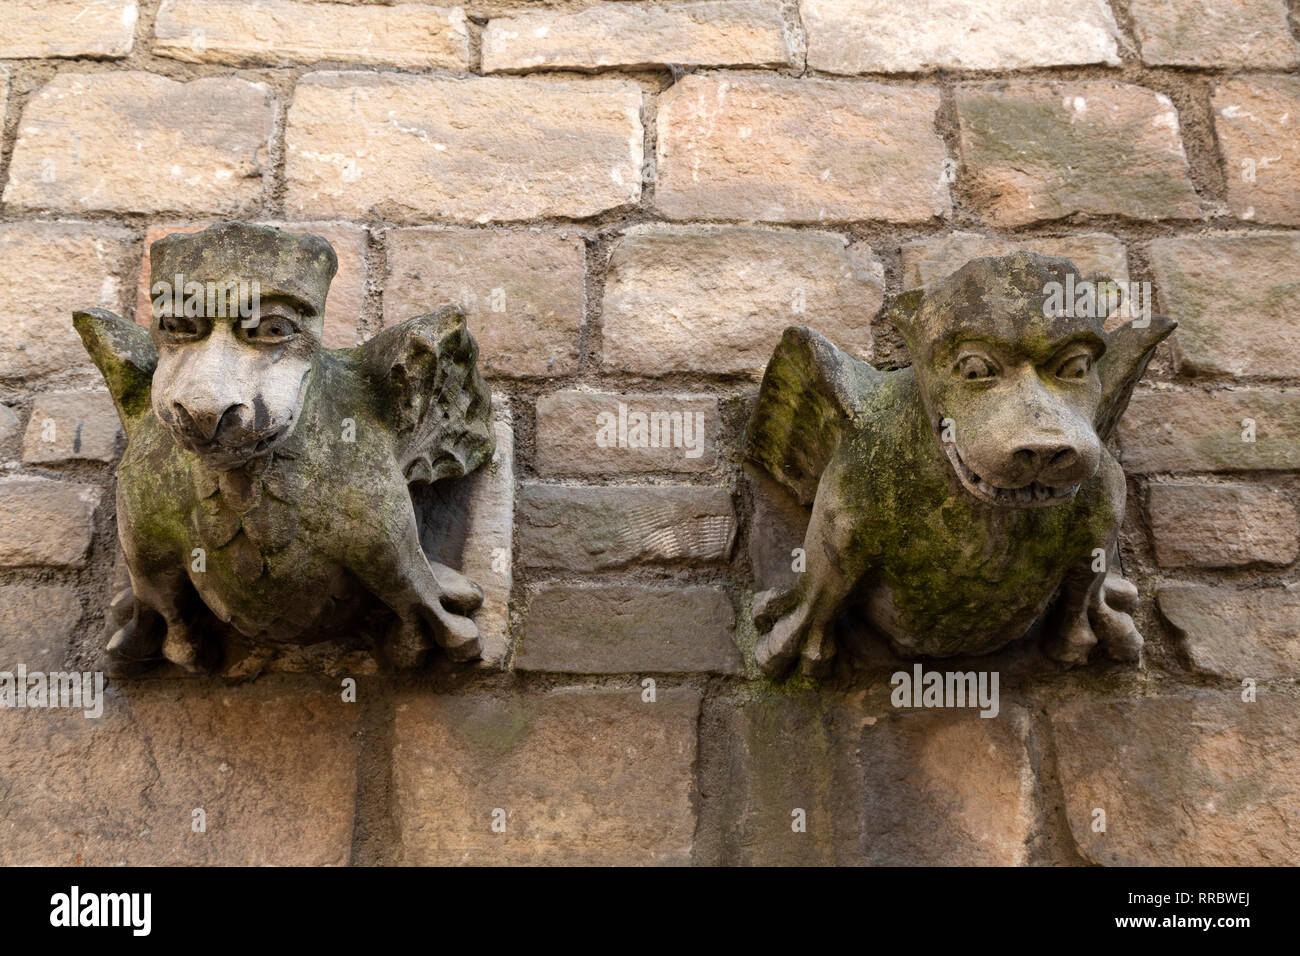 Stone gargoyles in York, England. They are on a wall at the St Martin le Grand church. Stock Photo